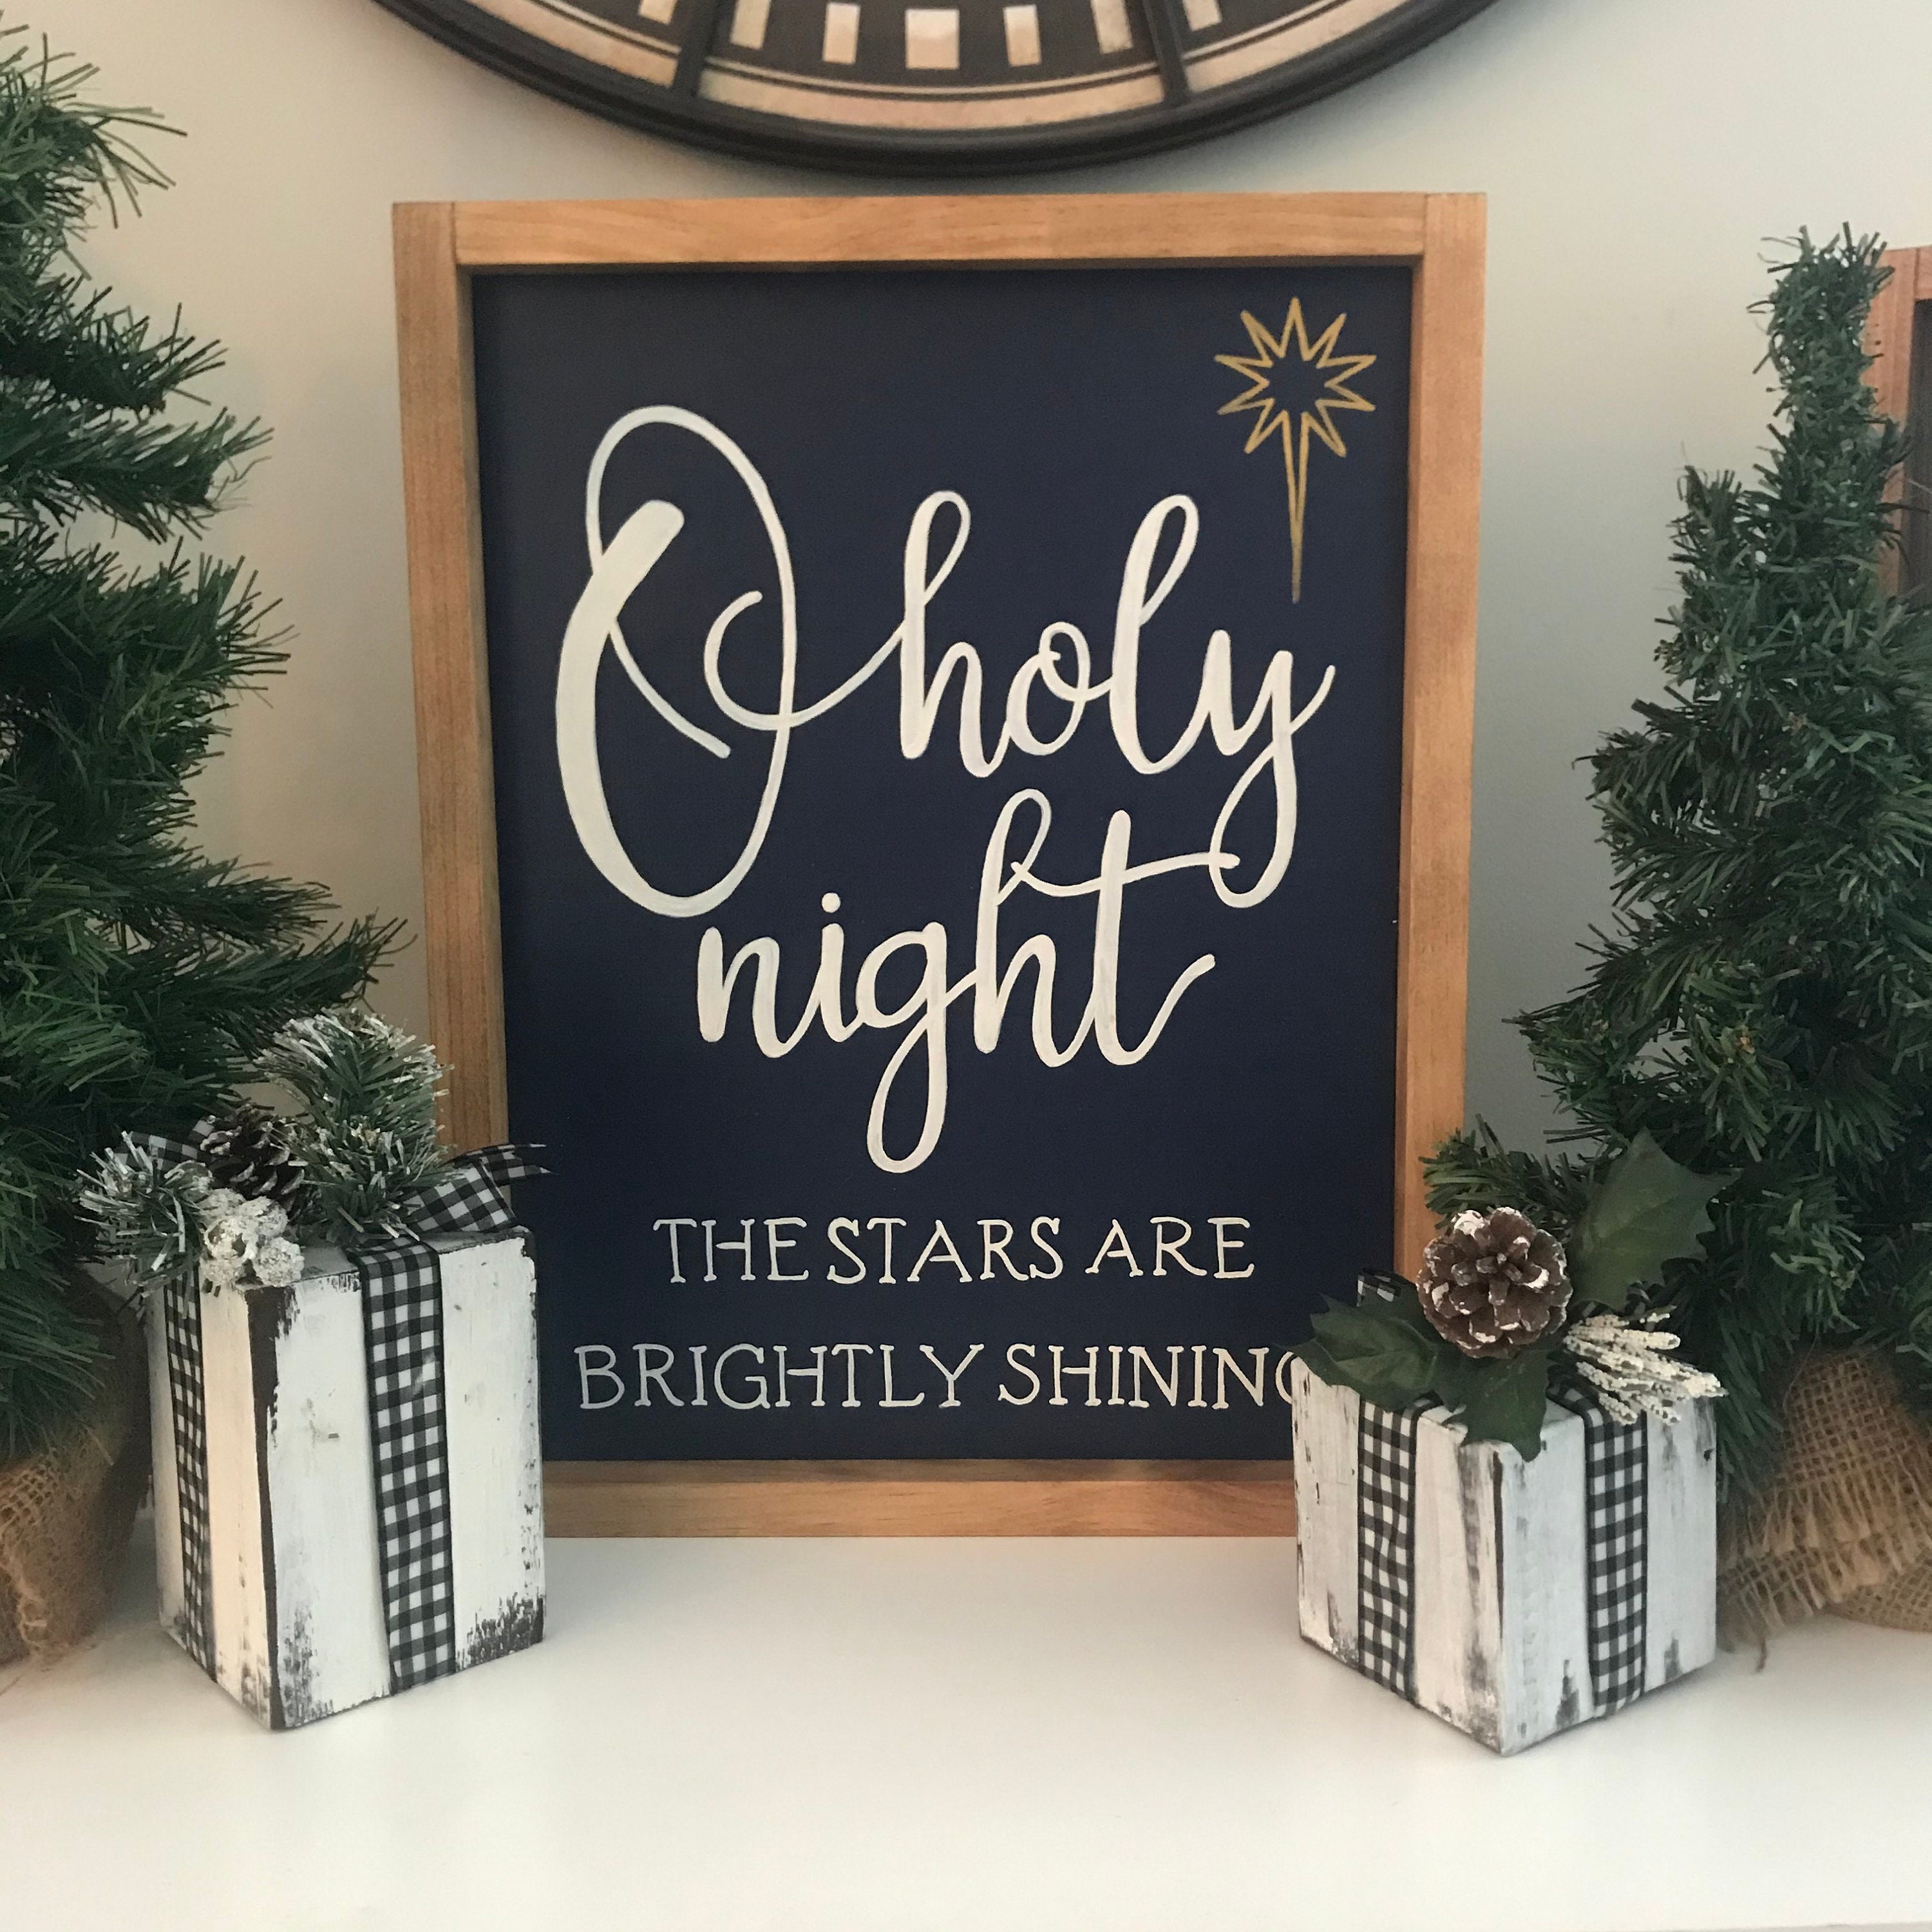 Oh Holy Night I 11x16 inch Wood Sign